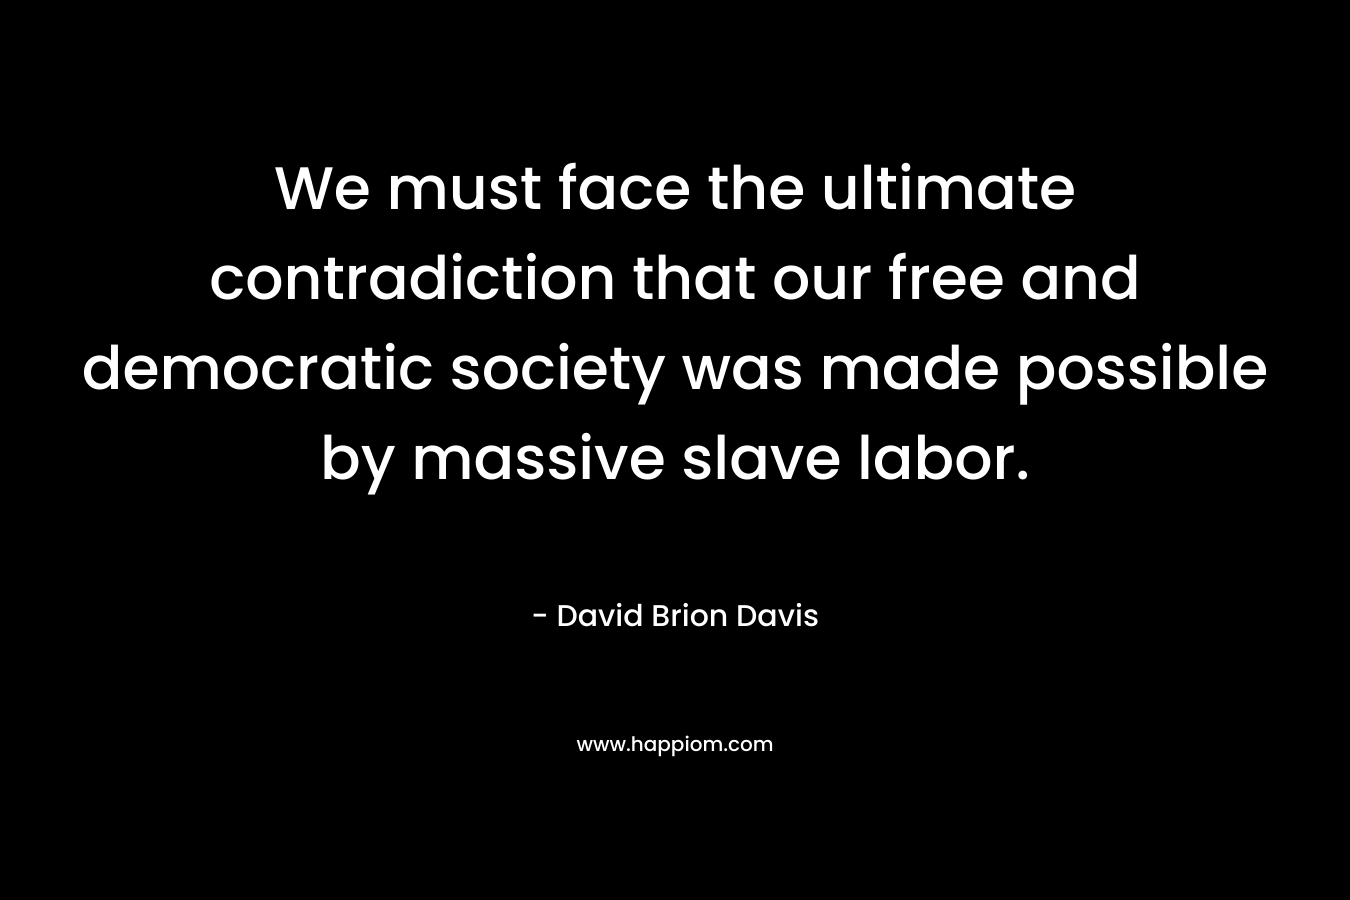 We must face the ultimate contradiction that our free and democratic society was made possible by massive slave labor. – David Brion Davis